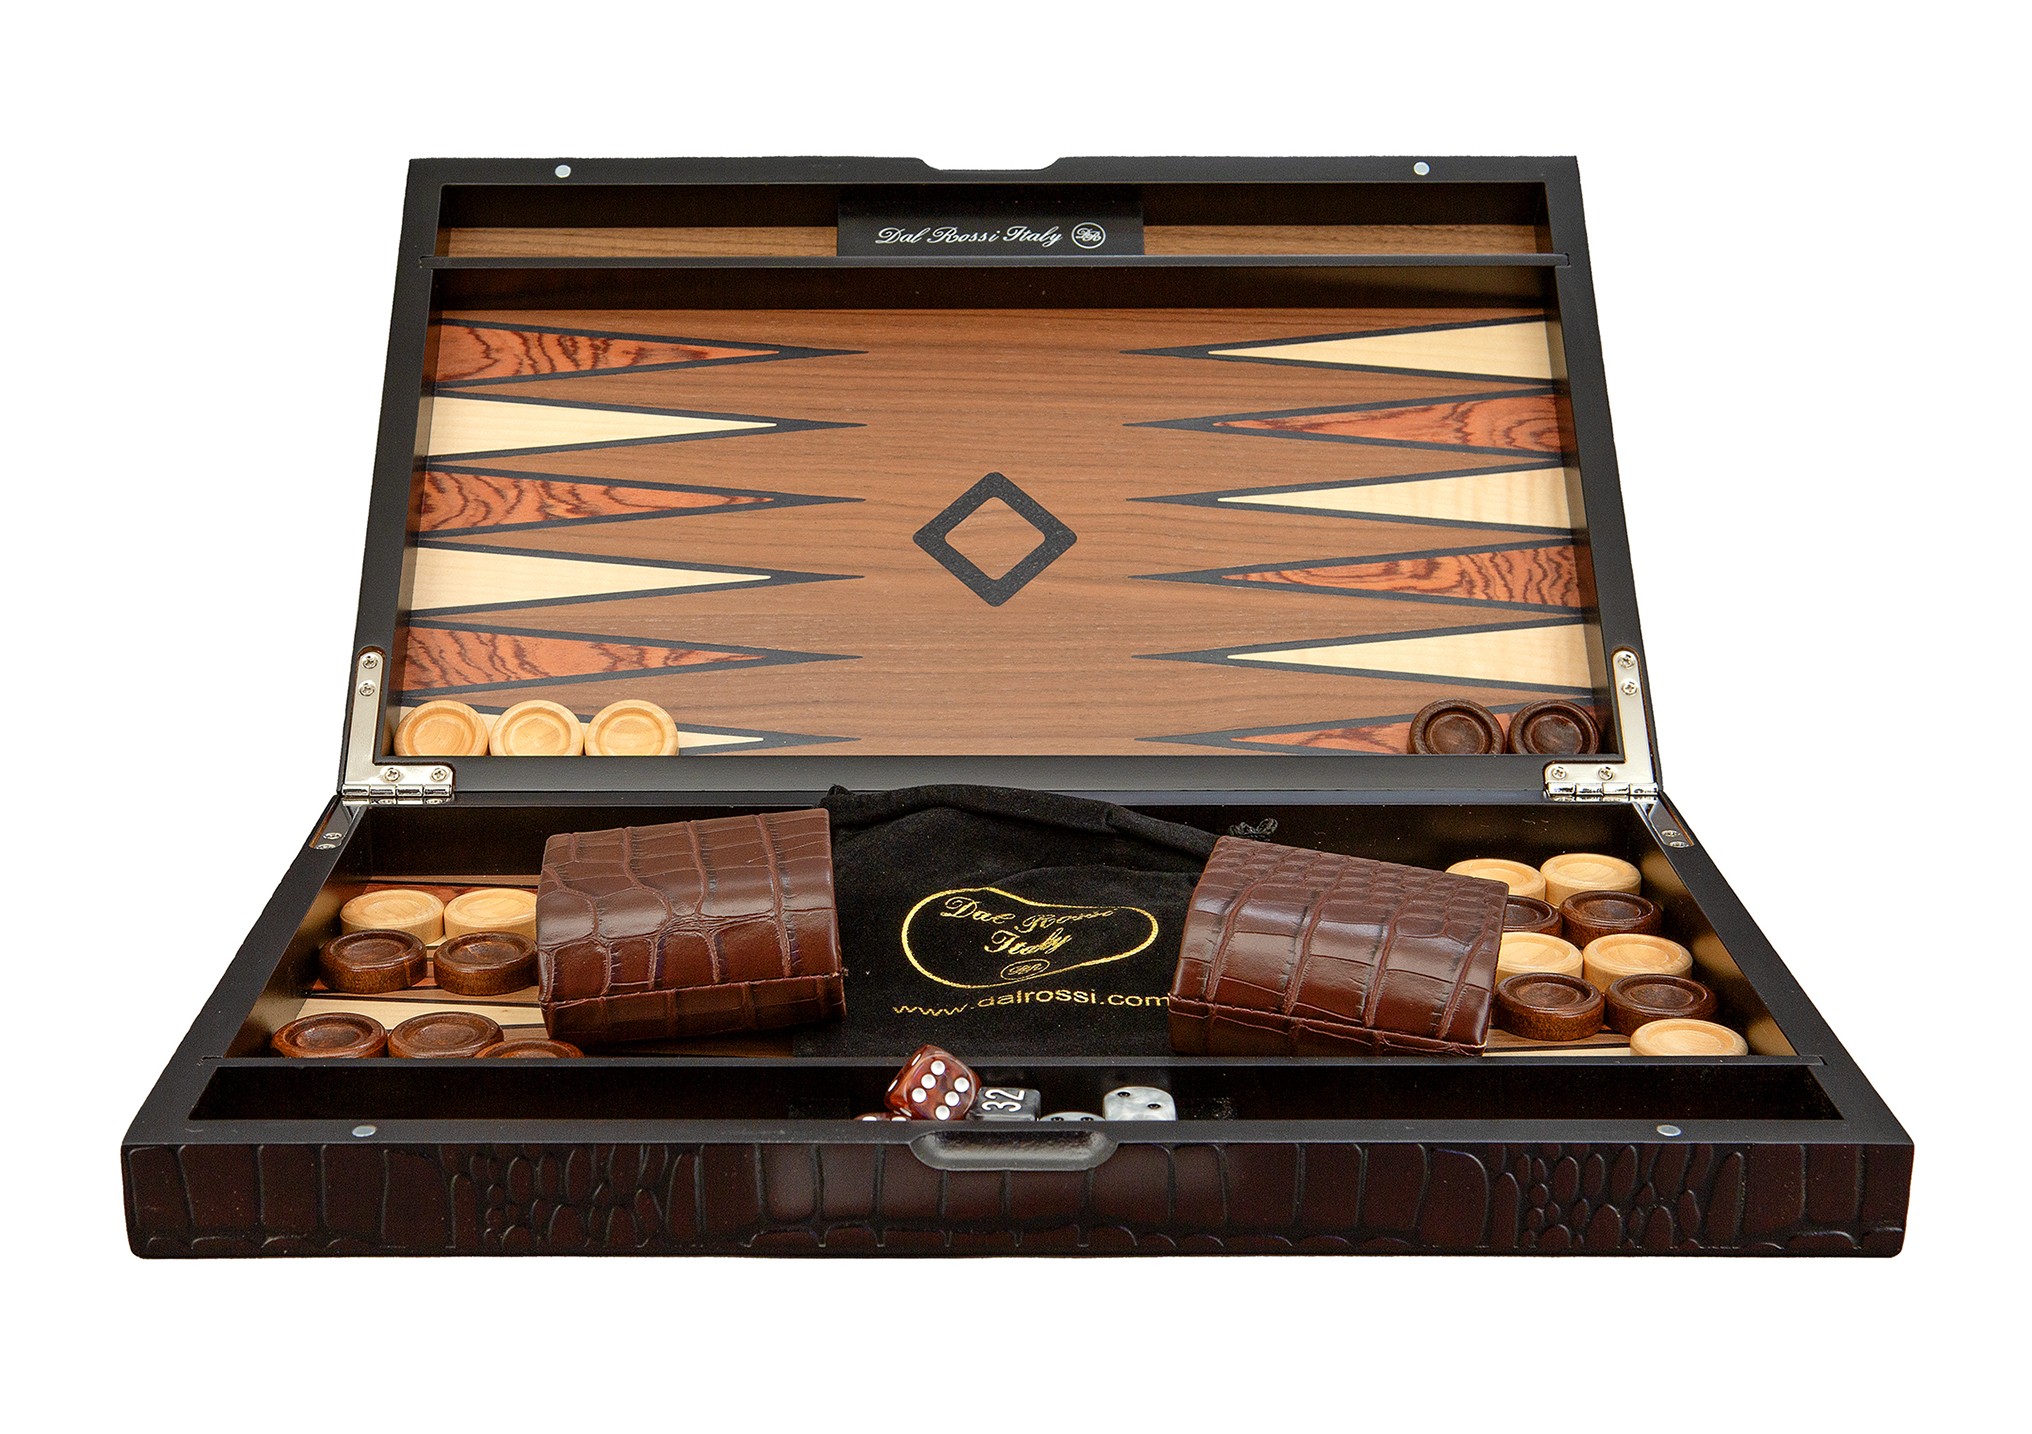 Dal Rossi Wooden Crocodile Engraved Design Backgammon Dark Colour Design Top and Inlaid Wooden Playing Area 15" 